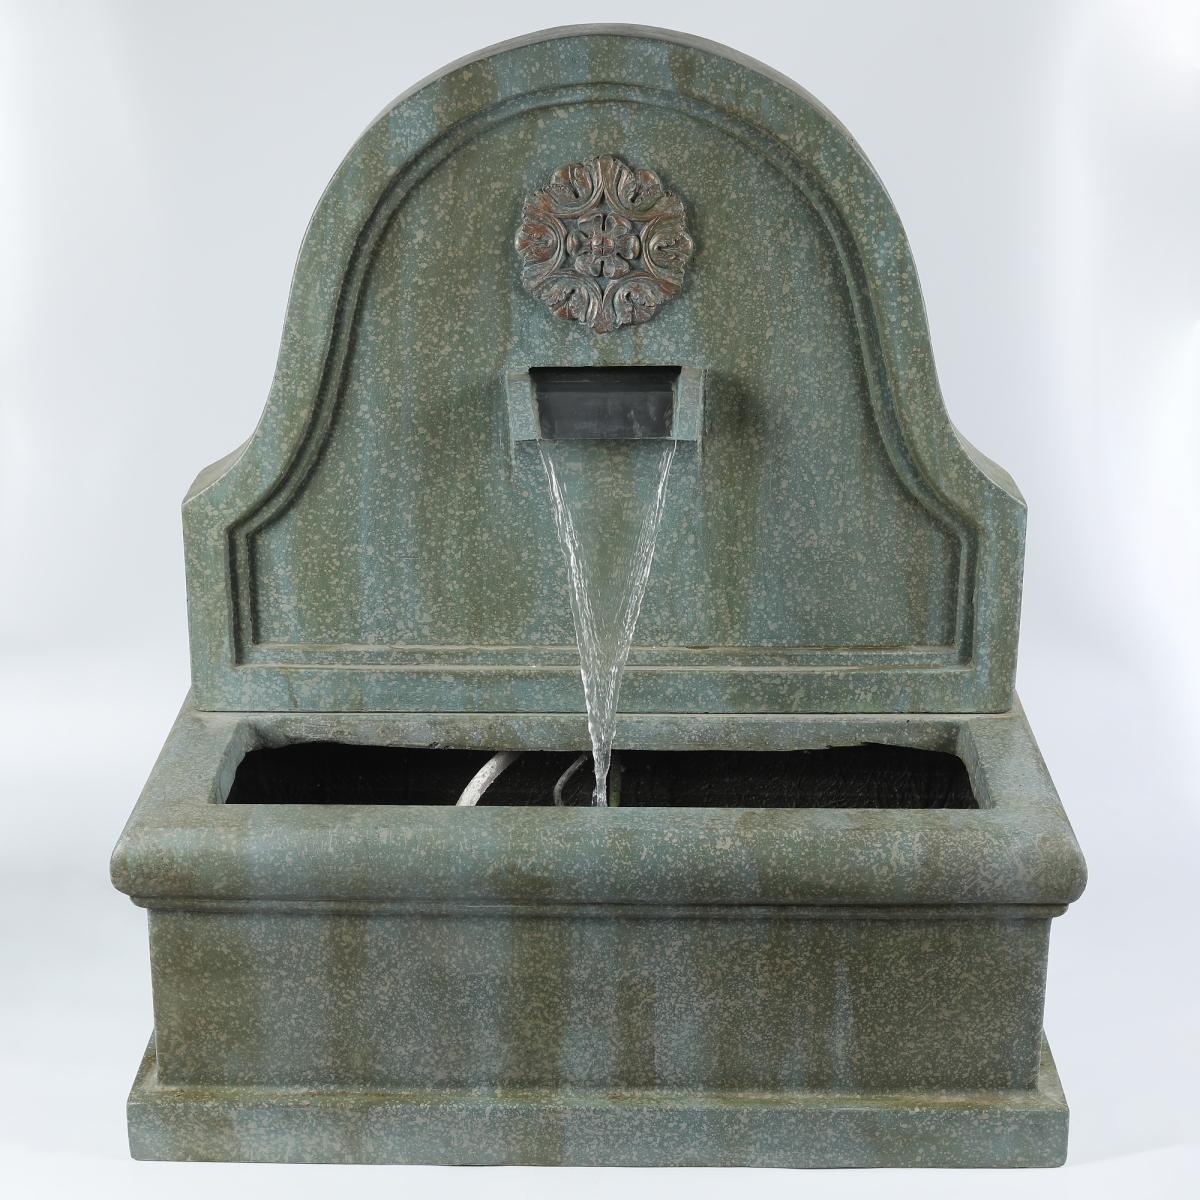 Whf726 Stone & Patina Finish Arched Top Rectangular Base Outdoor Patio Fountain